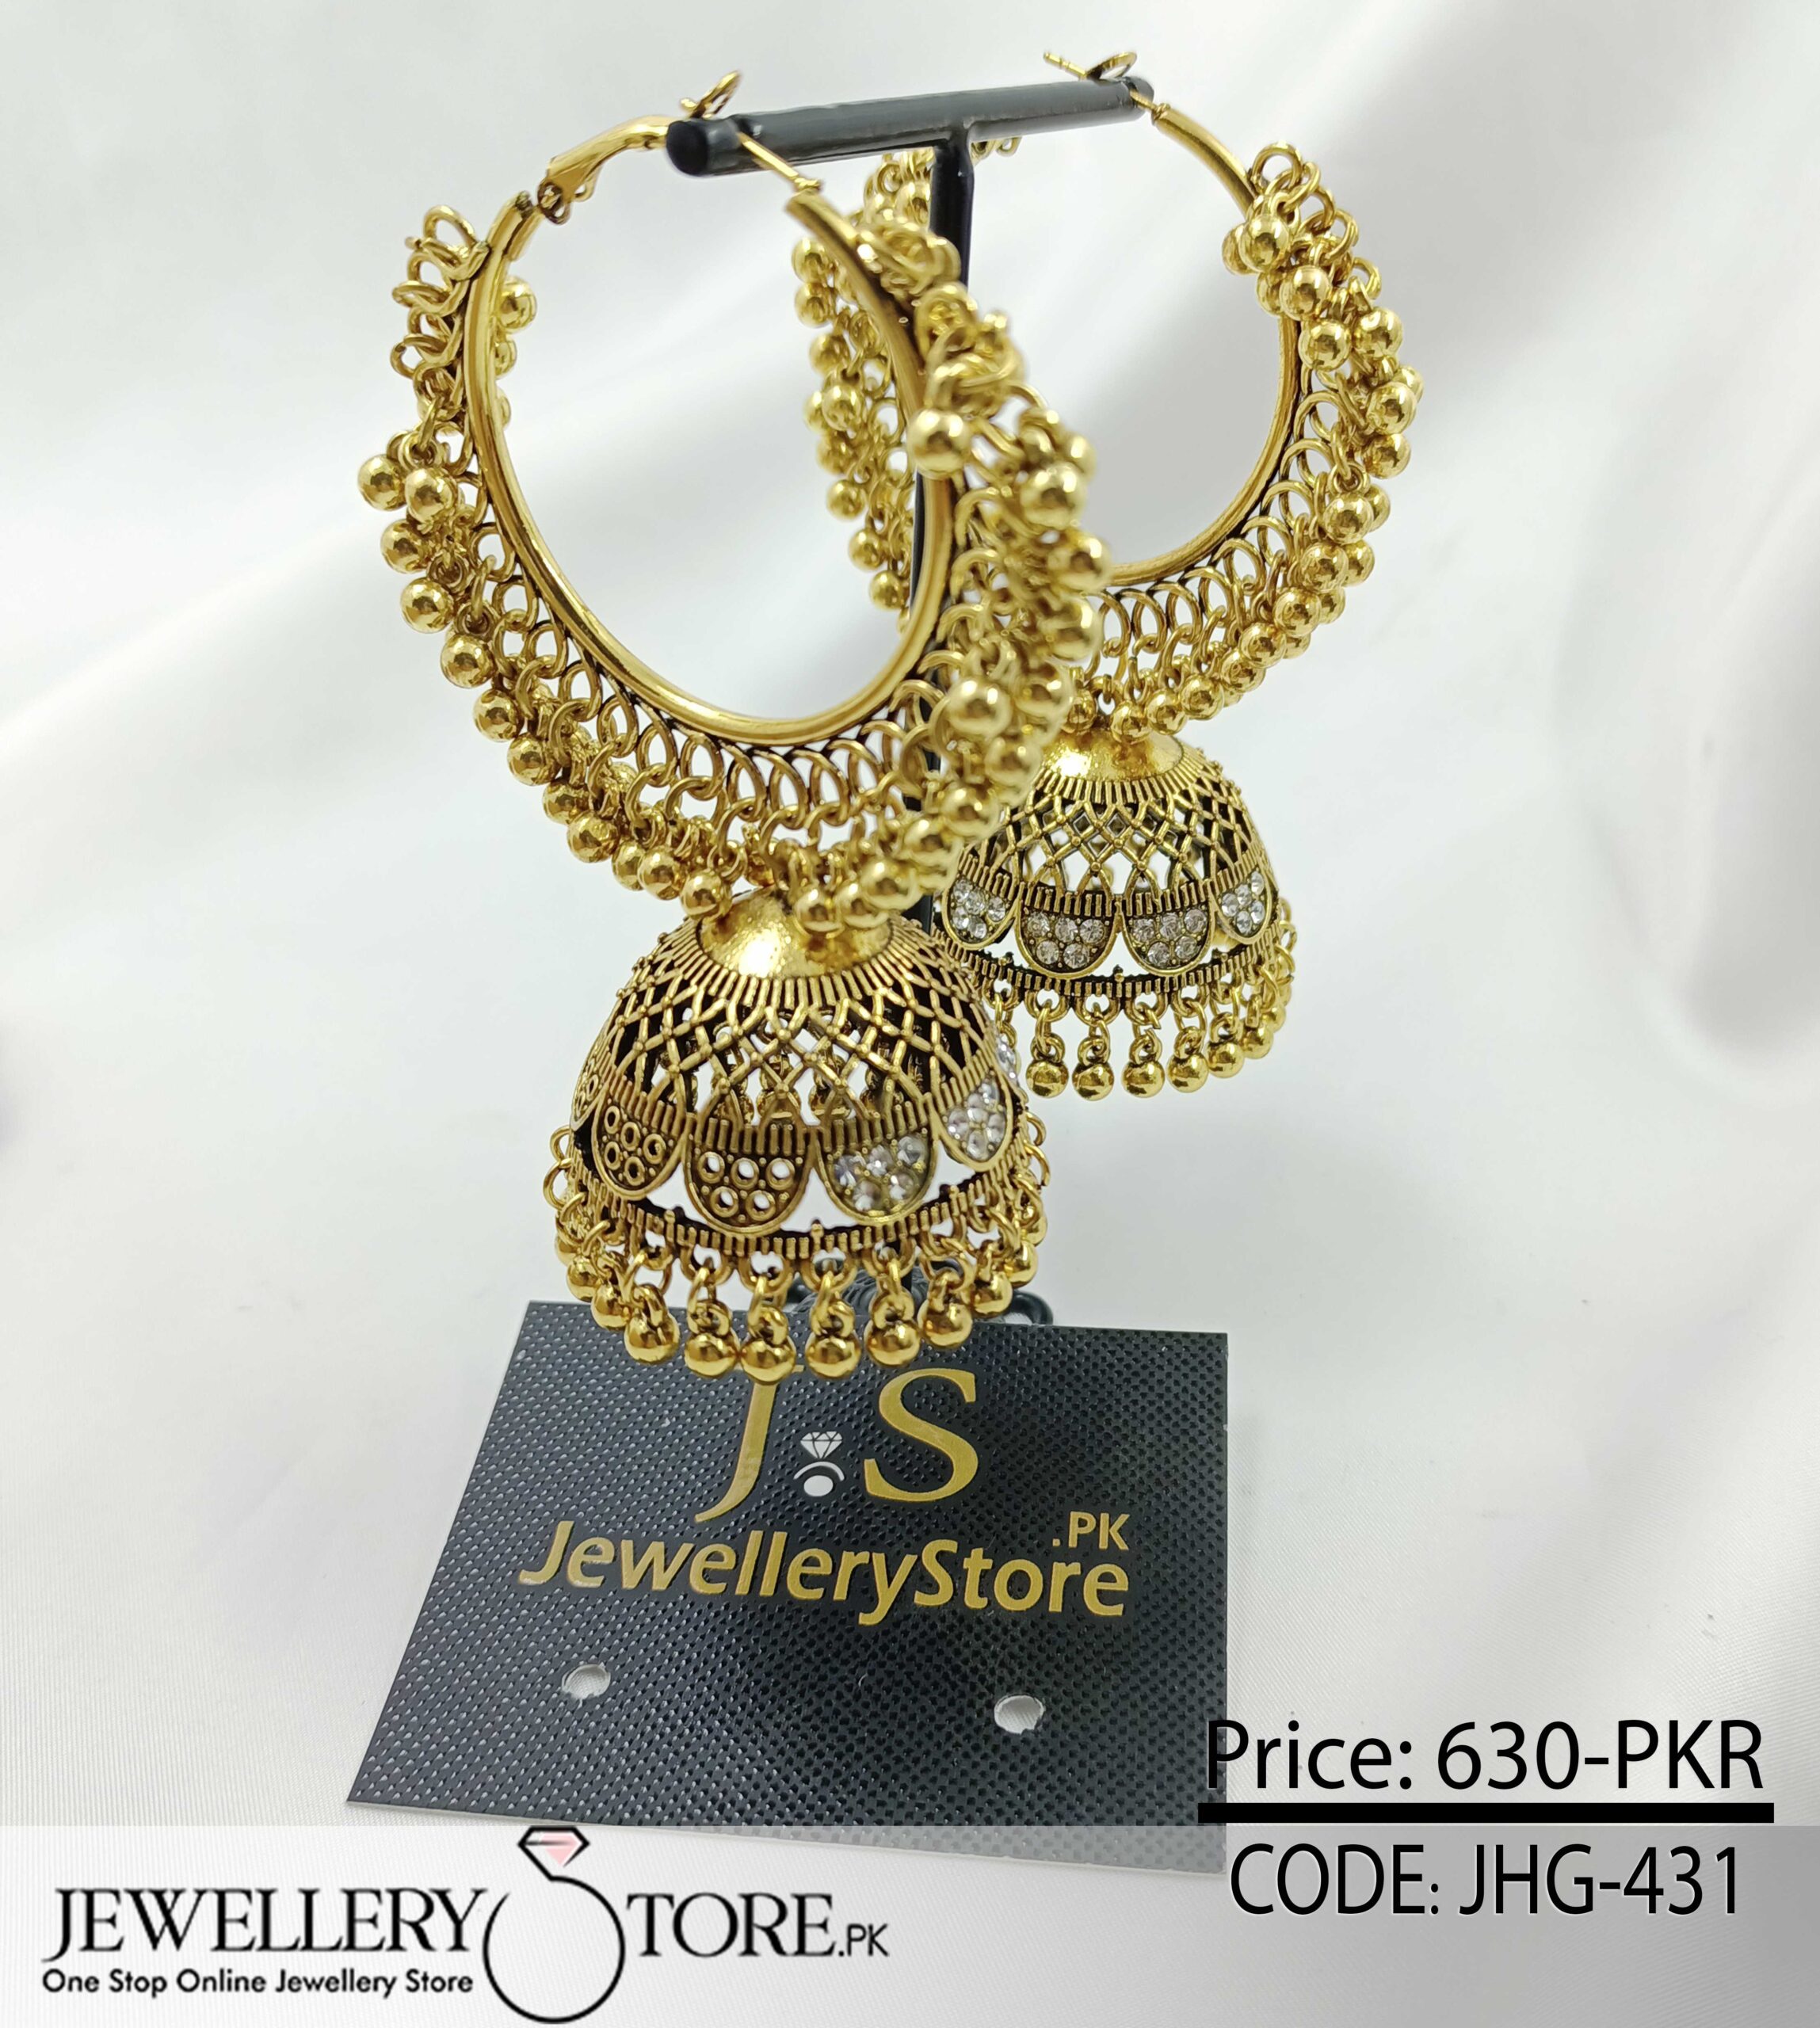 Luxury Designer Tassel In Hindi Stud Earrings With Geometric Letters For  Women Perfect For Weddings And Parties Size M1F From Bagyy, $30.76 |  DHgate.Com